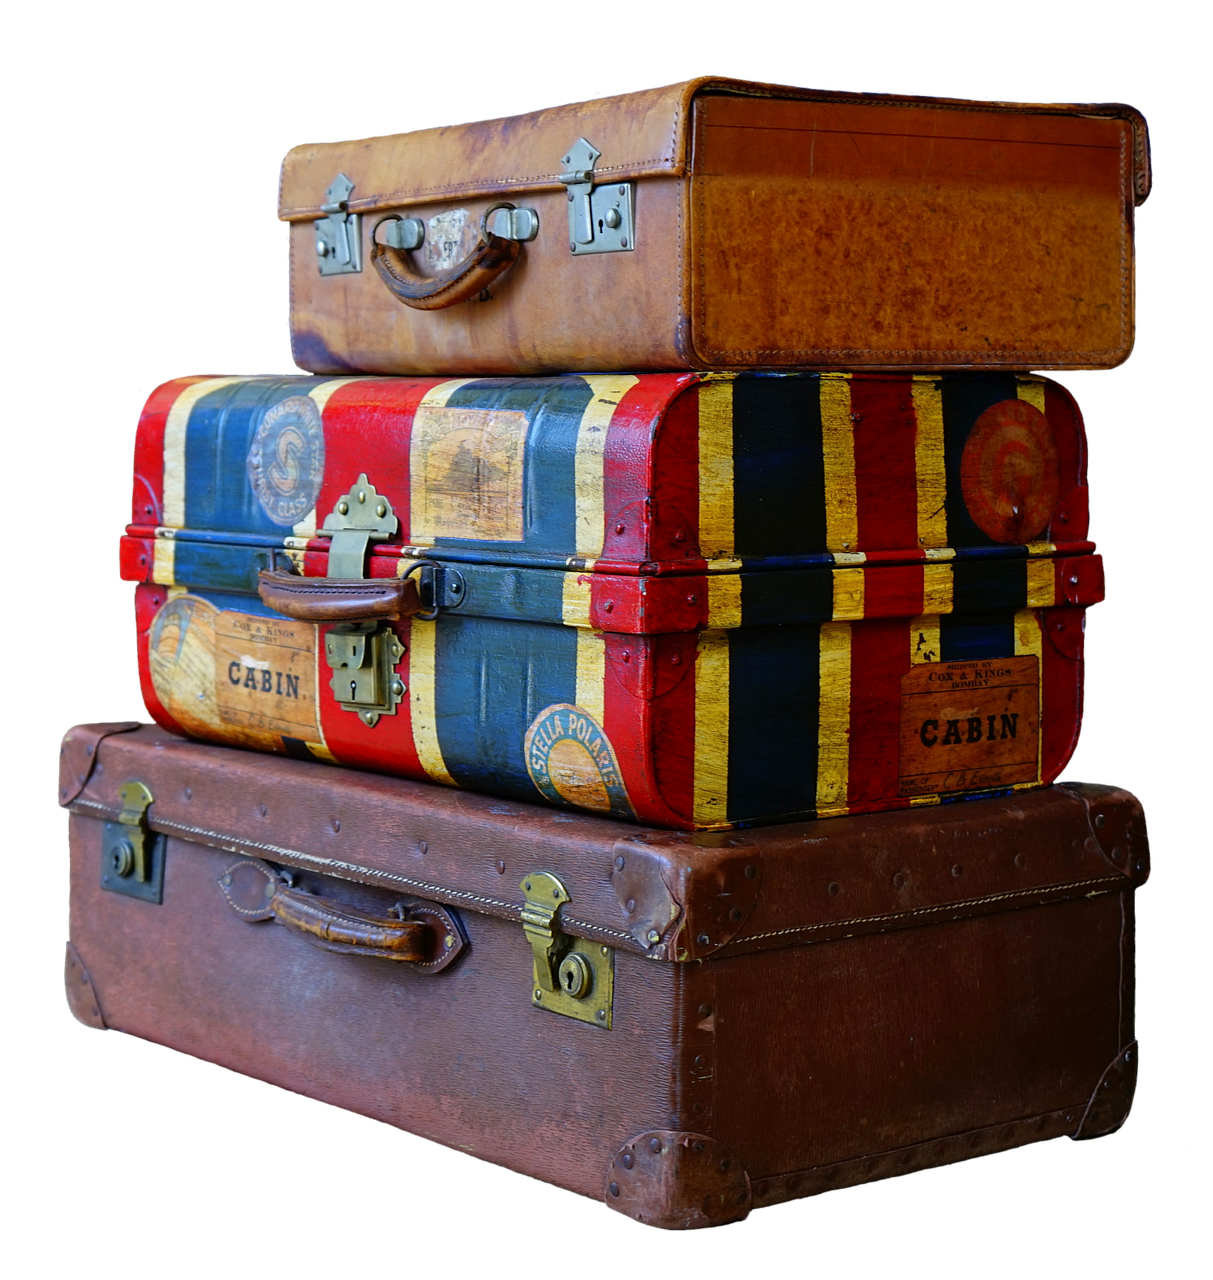 three suitcases stacked on top of each other, by David Garner, shutterstock, assemblage, on black background, vintage theme, a colorful, old english